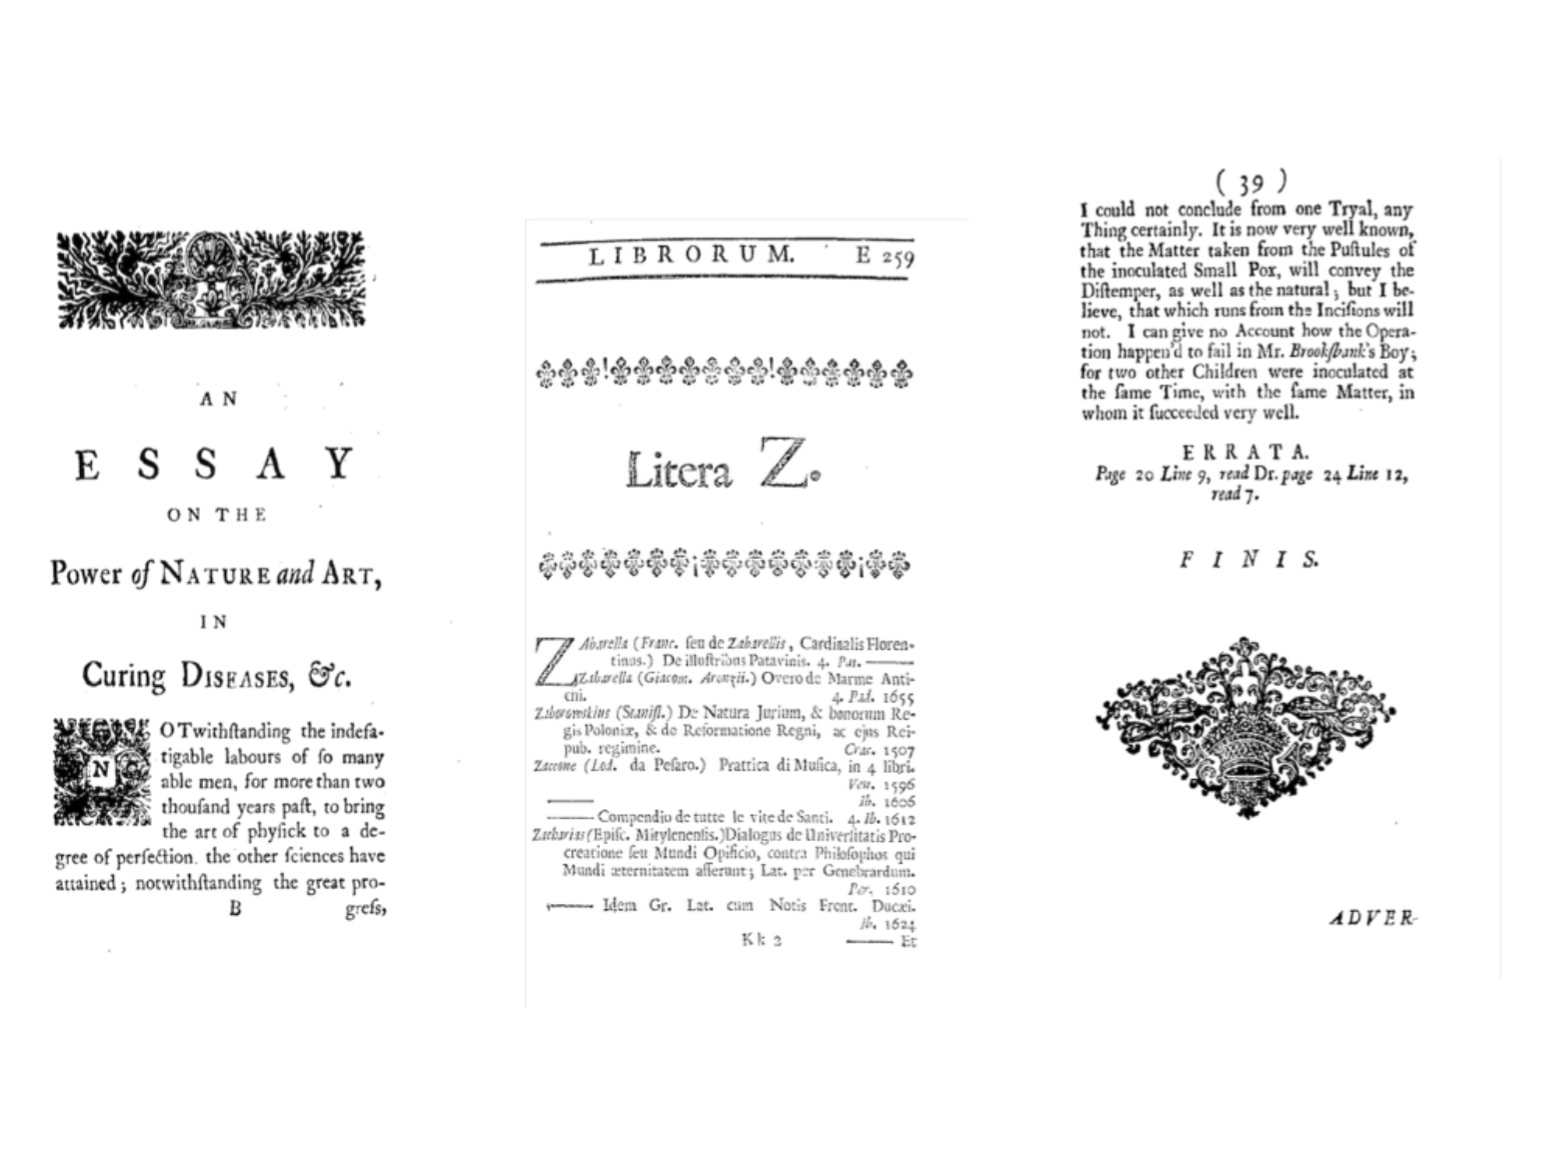 Three examples of typical printers’ ornaments. 1a: A headpiece and factotum; 1b: Two rows of fleurons; 1c: A Tailpiece